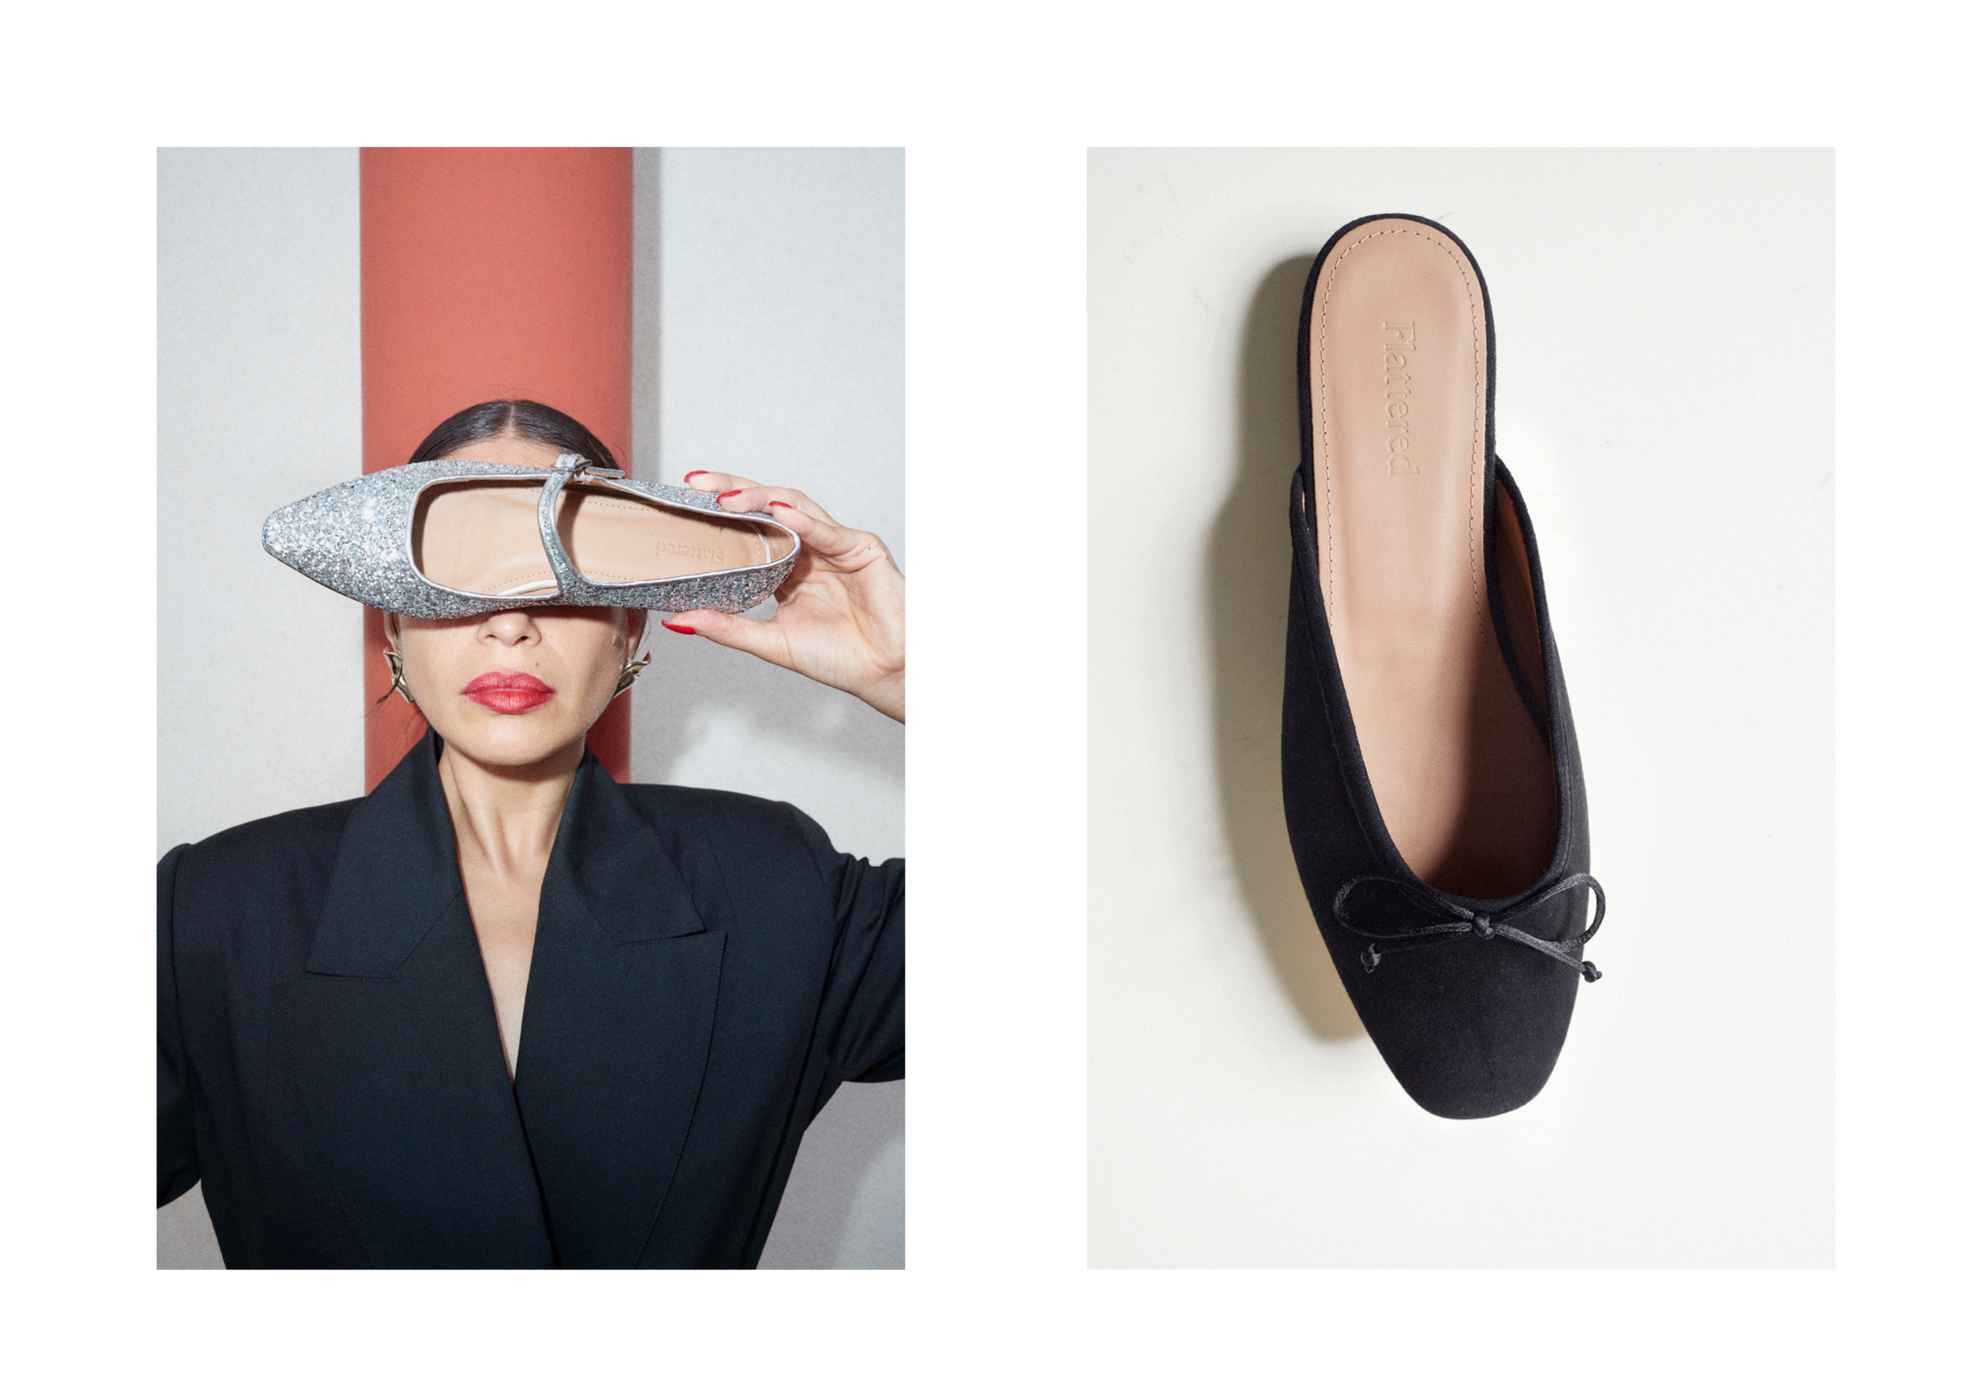 Two images. One with a woman holding a shoe in front of her eyes and one with a black ballerina shoe on a white surface.